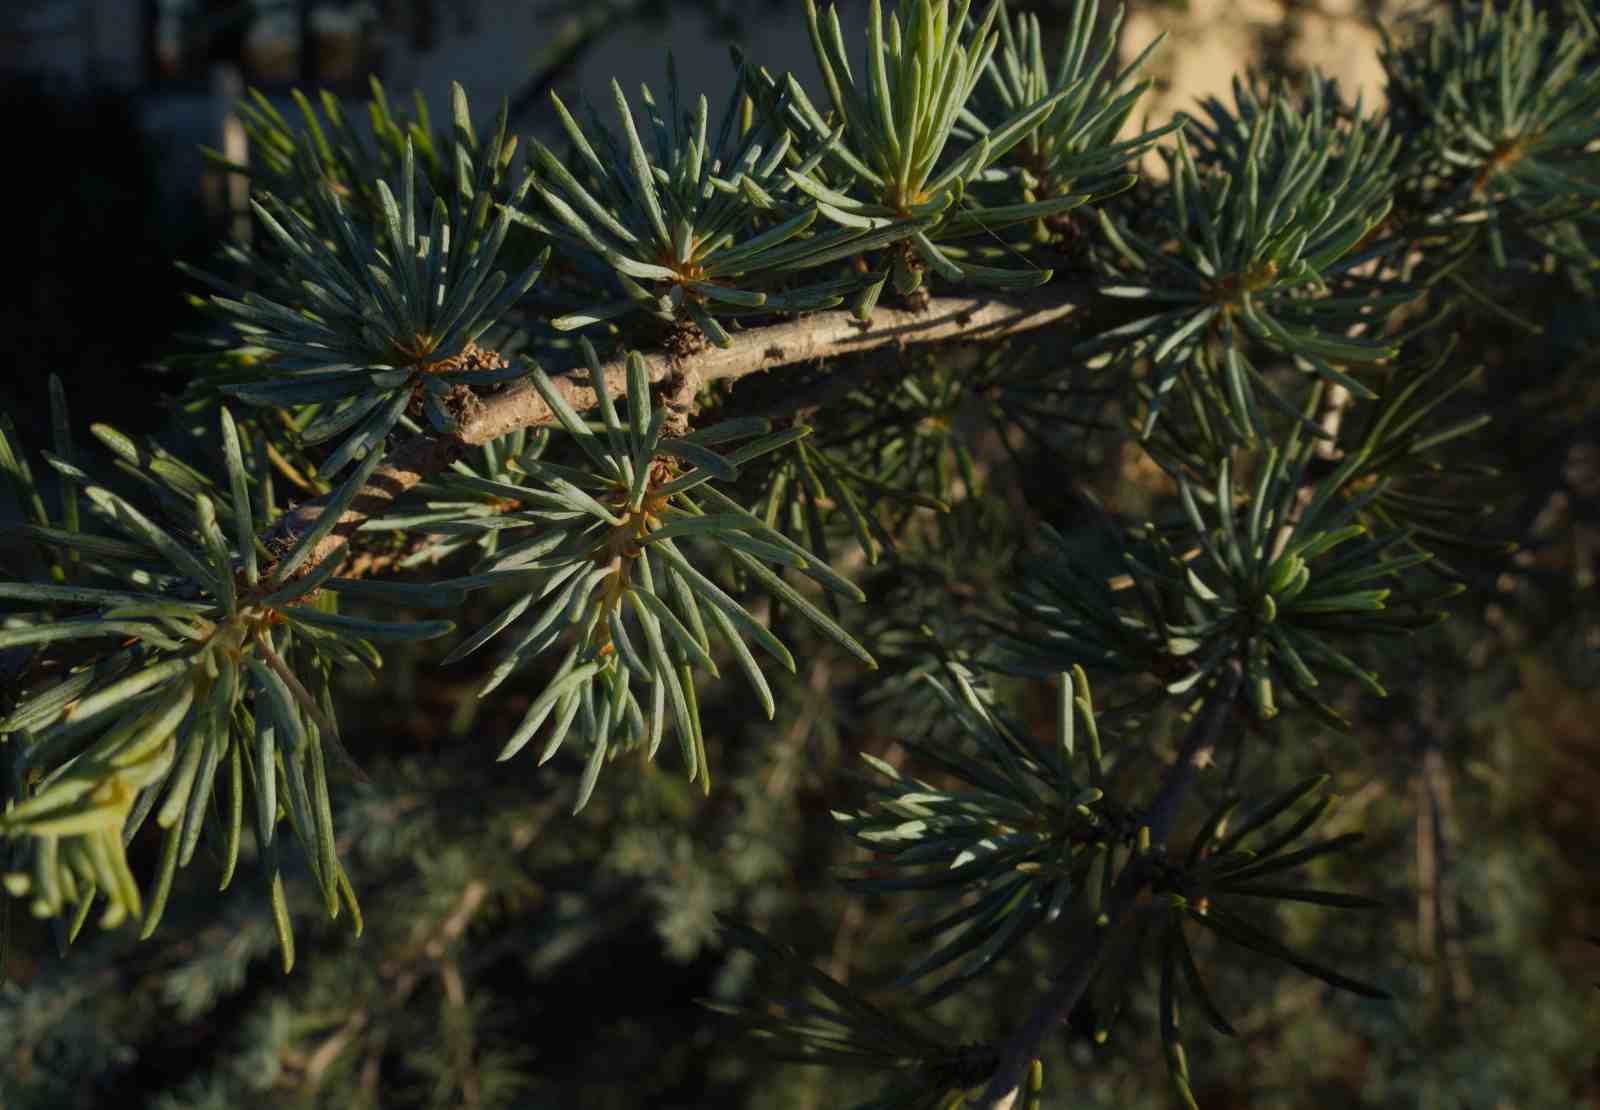 A macro view of pine needles photographed at sunset in winter